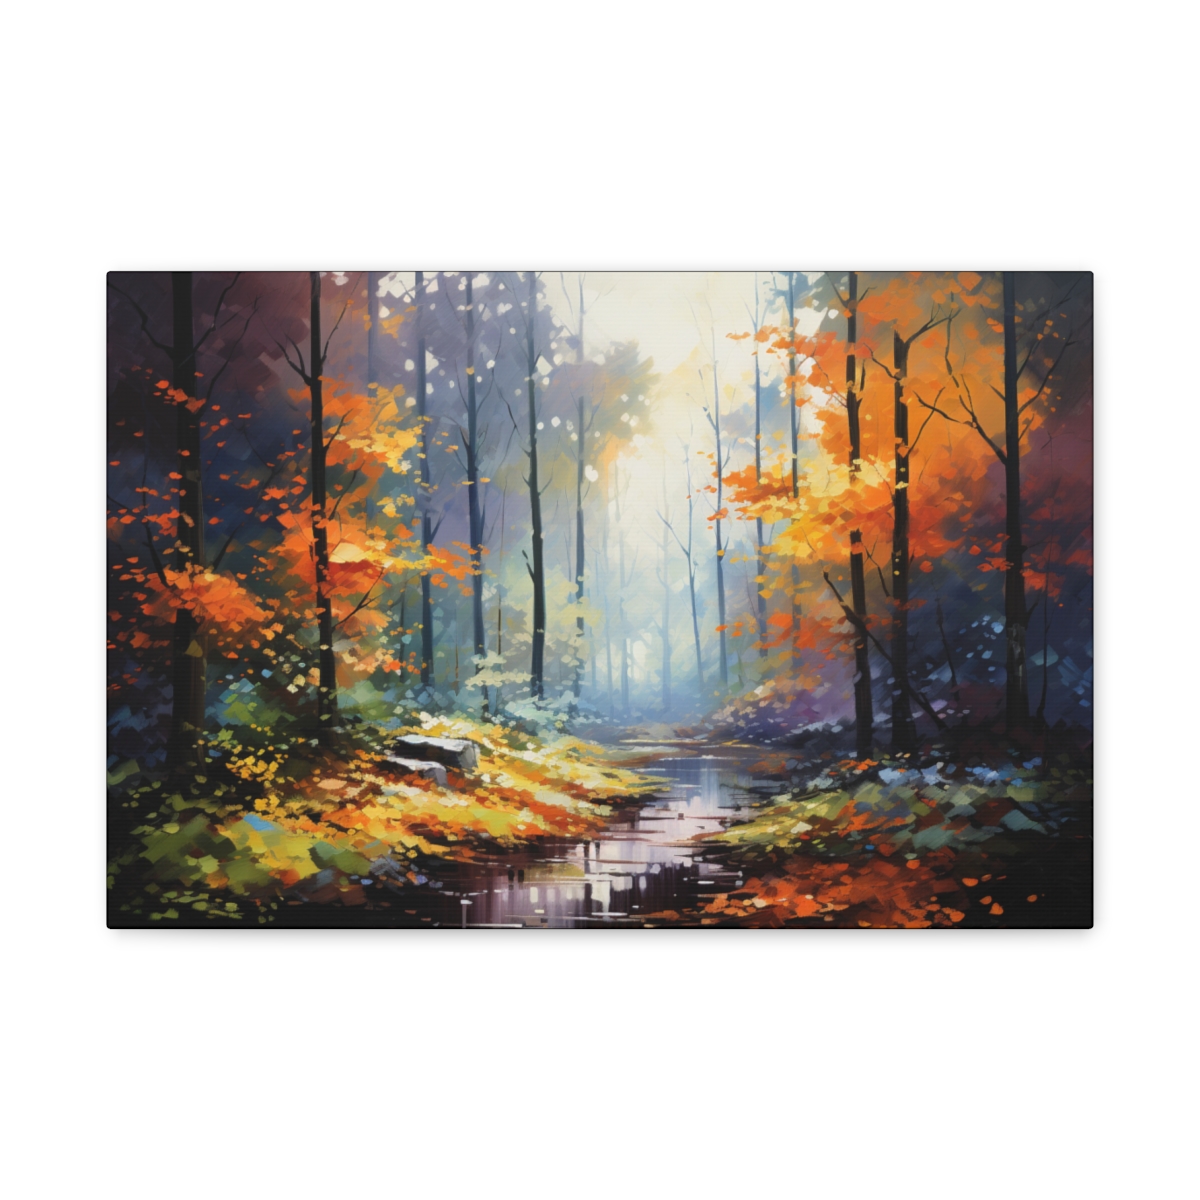 Forest Wall Art Canvas Print: The Way Ahead